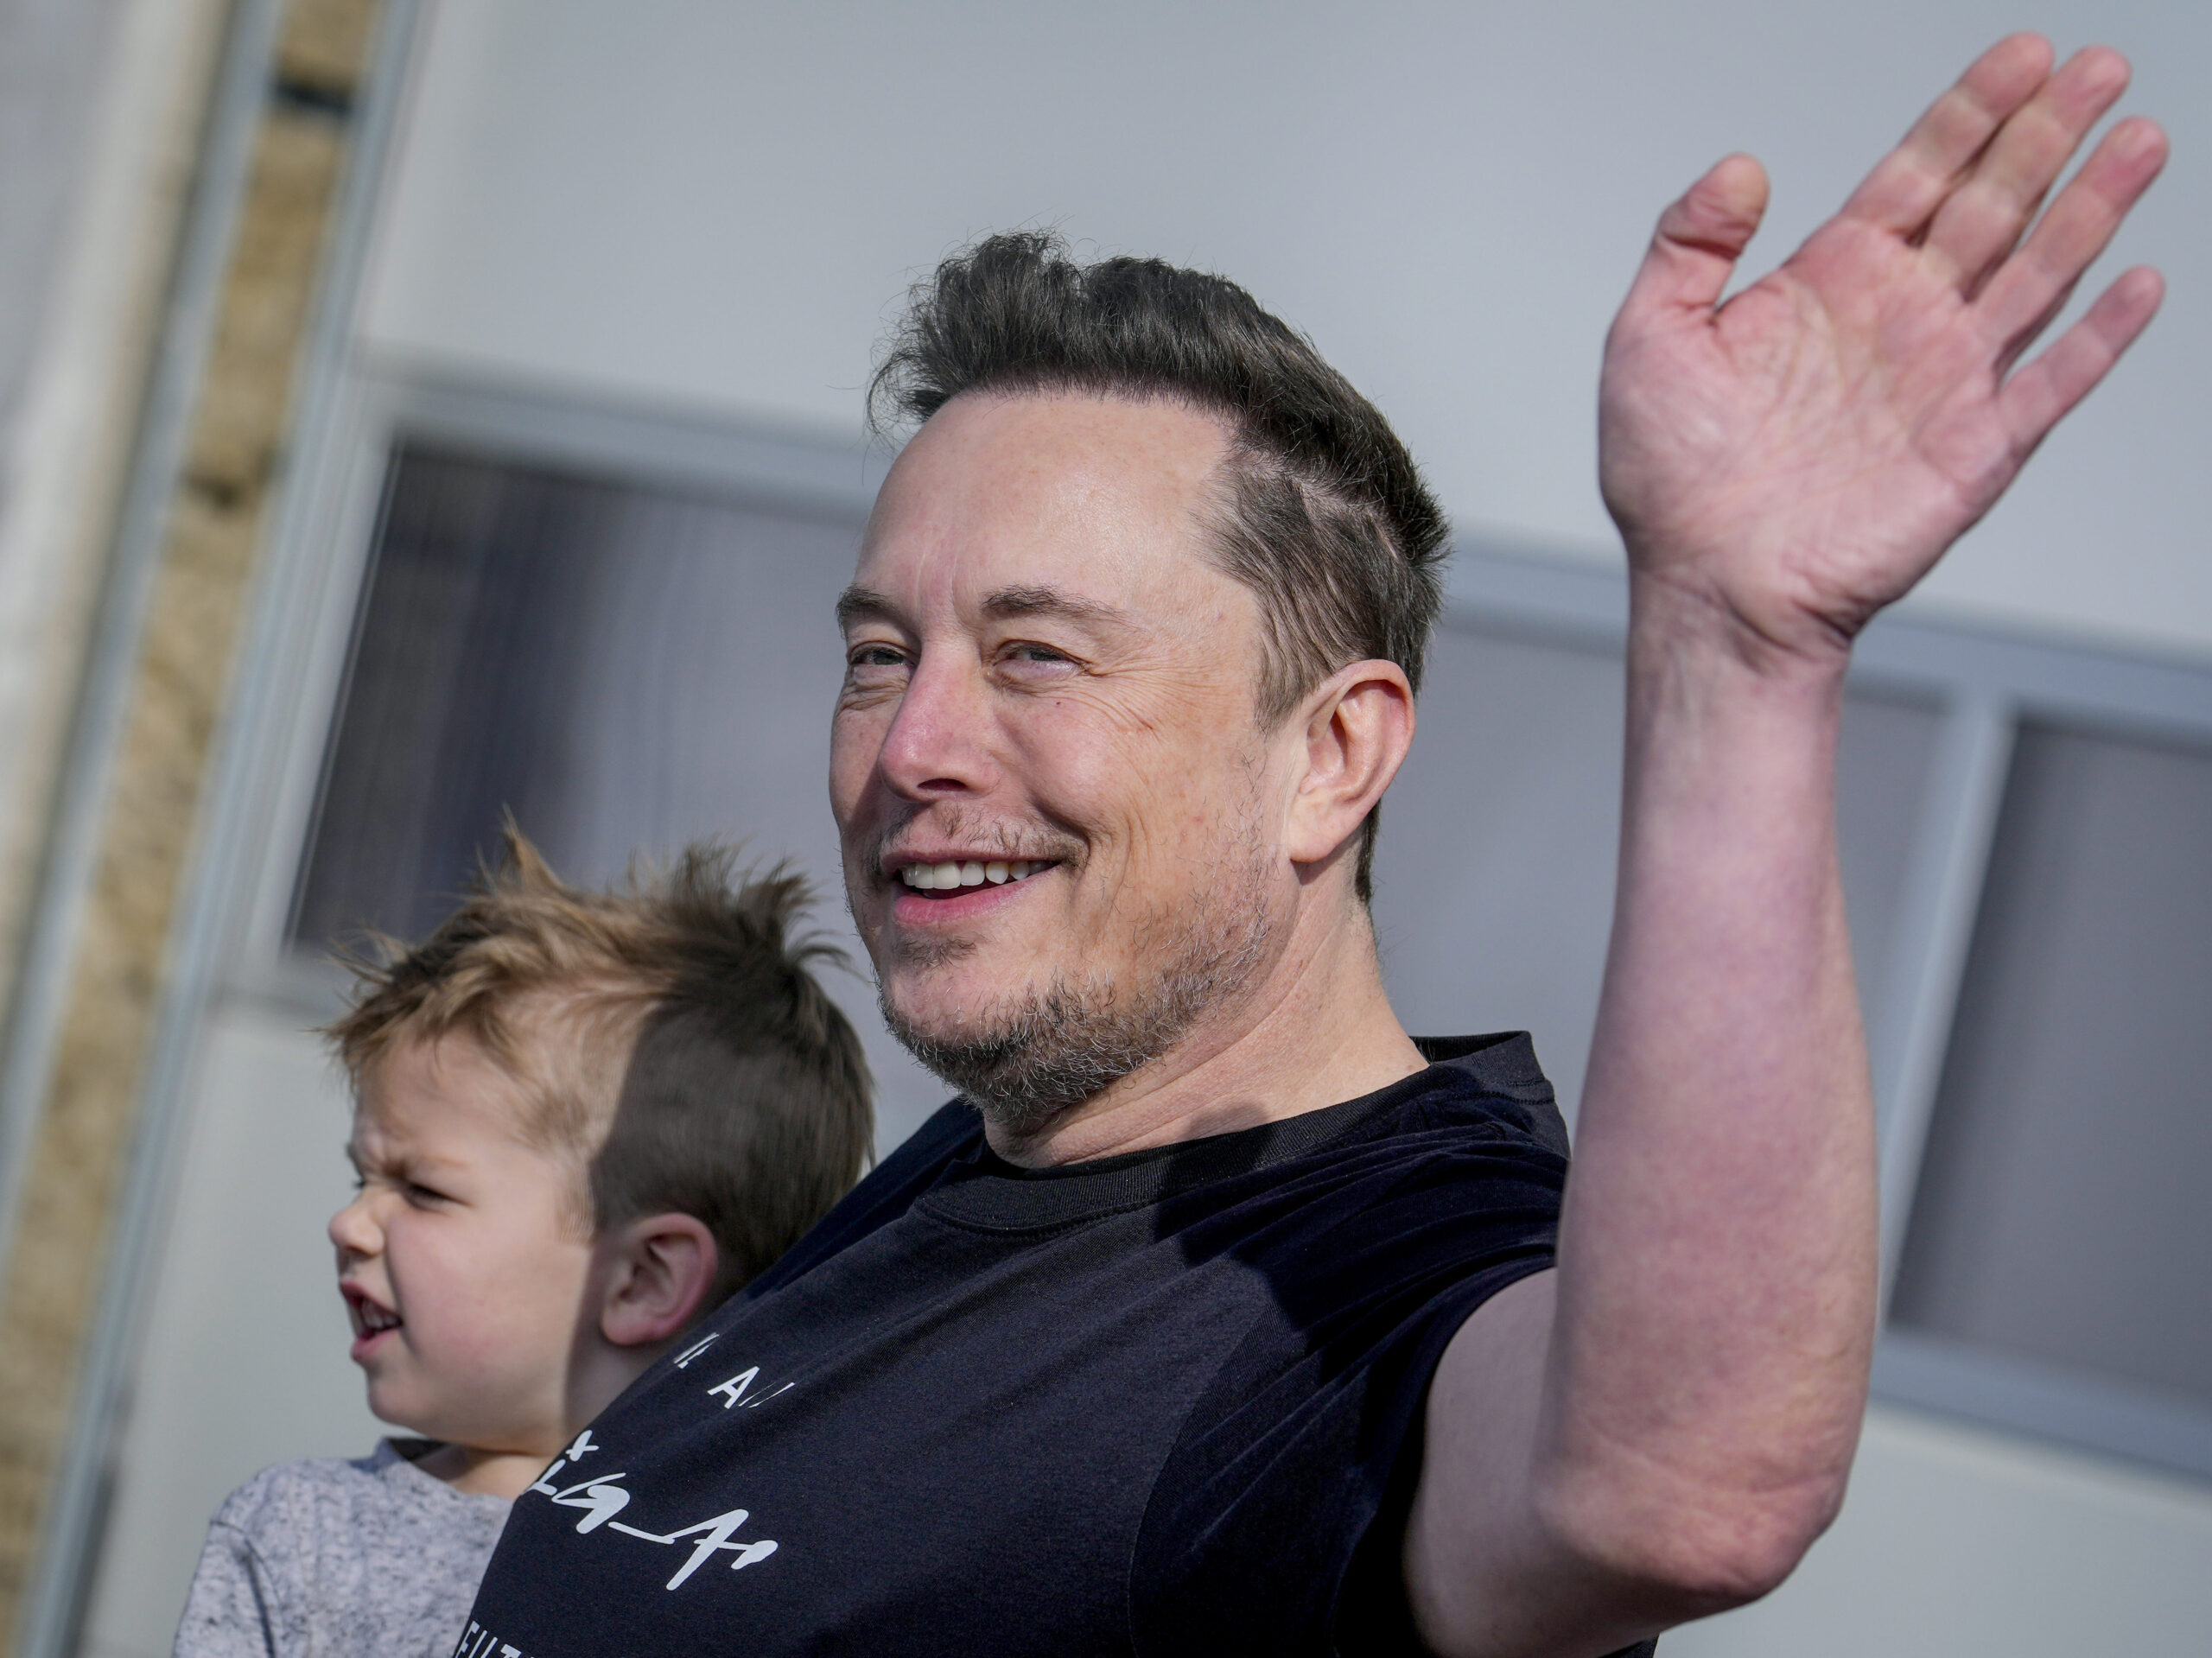 With his son in one arm, Tesla CEO Elon Musk waves while visiting the Tesla Gigafactory in Germany in March.